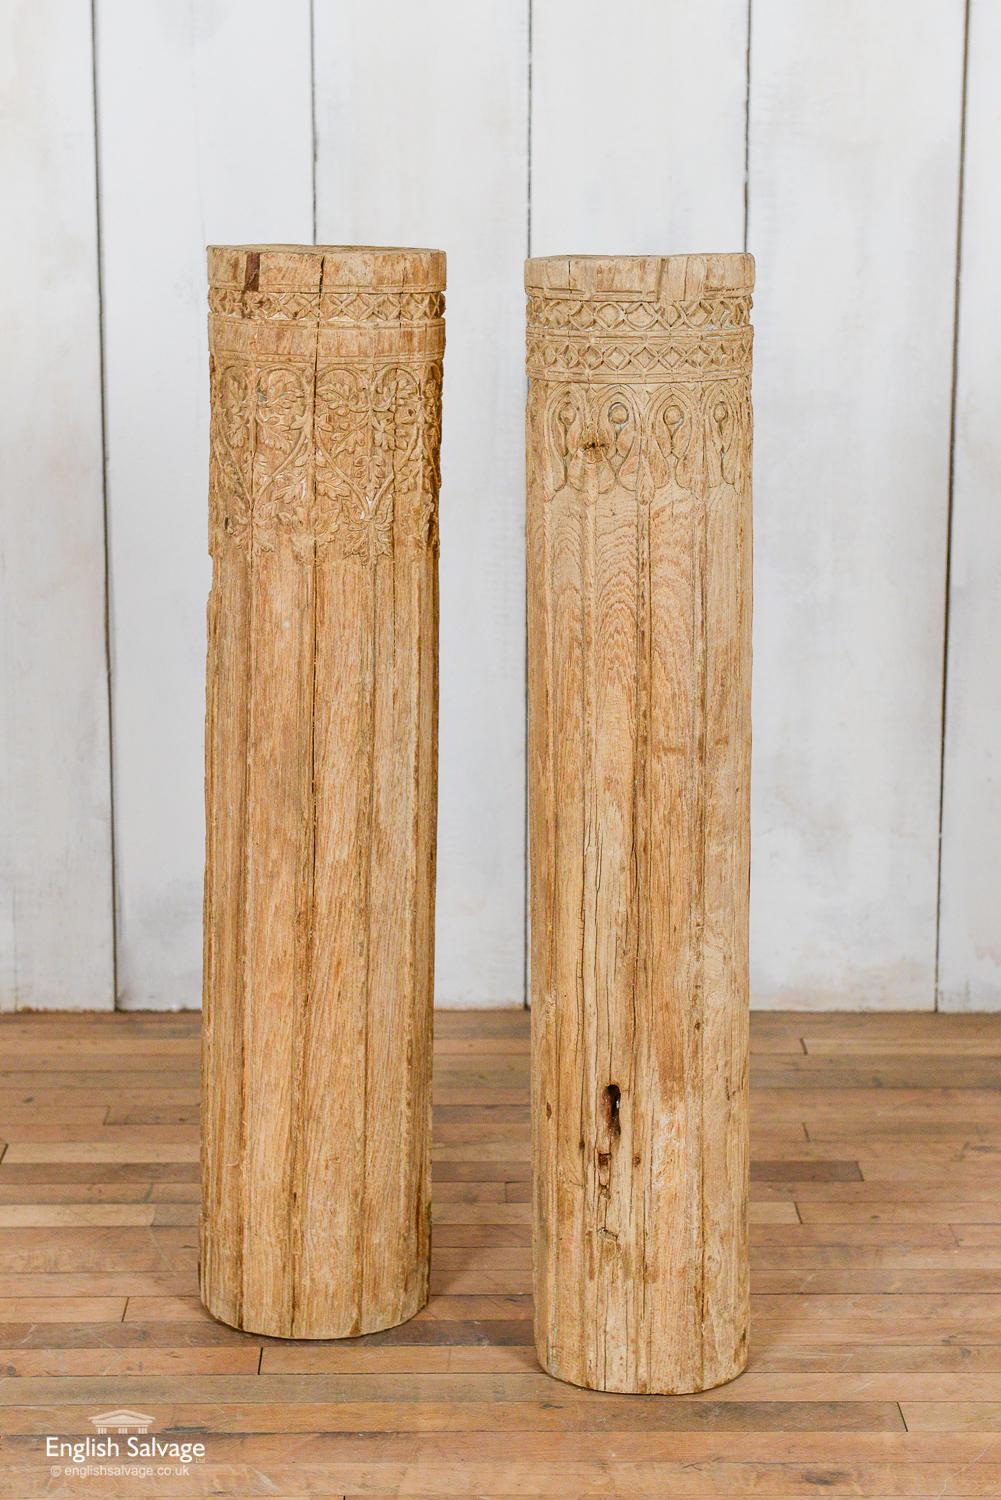 Reclaimed bleached hardwood decorative pillars. Could make nice table legs or candle holders. Smaller pillar measures 18cm x 91cm, larger one 20cm x 91cm. Splits to the wood commensurate with age.